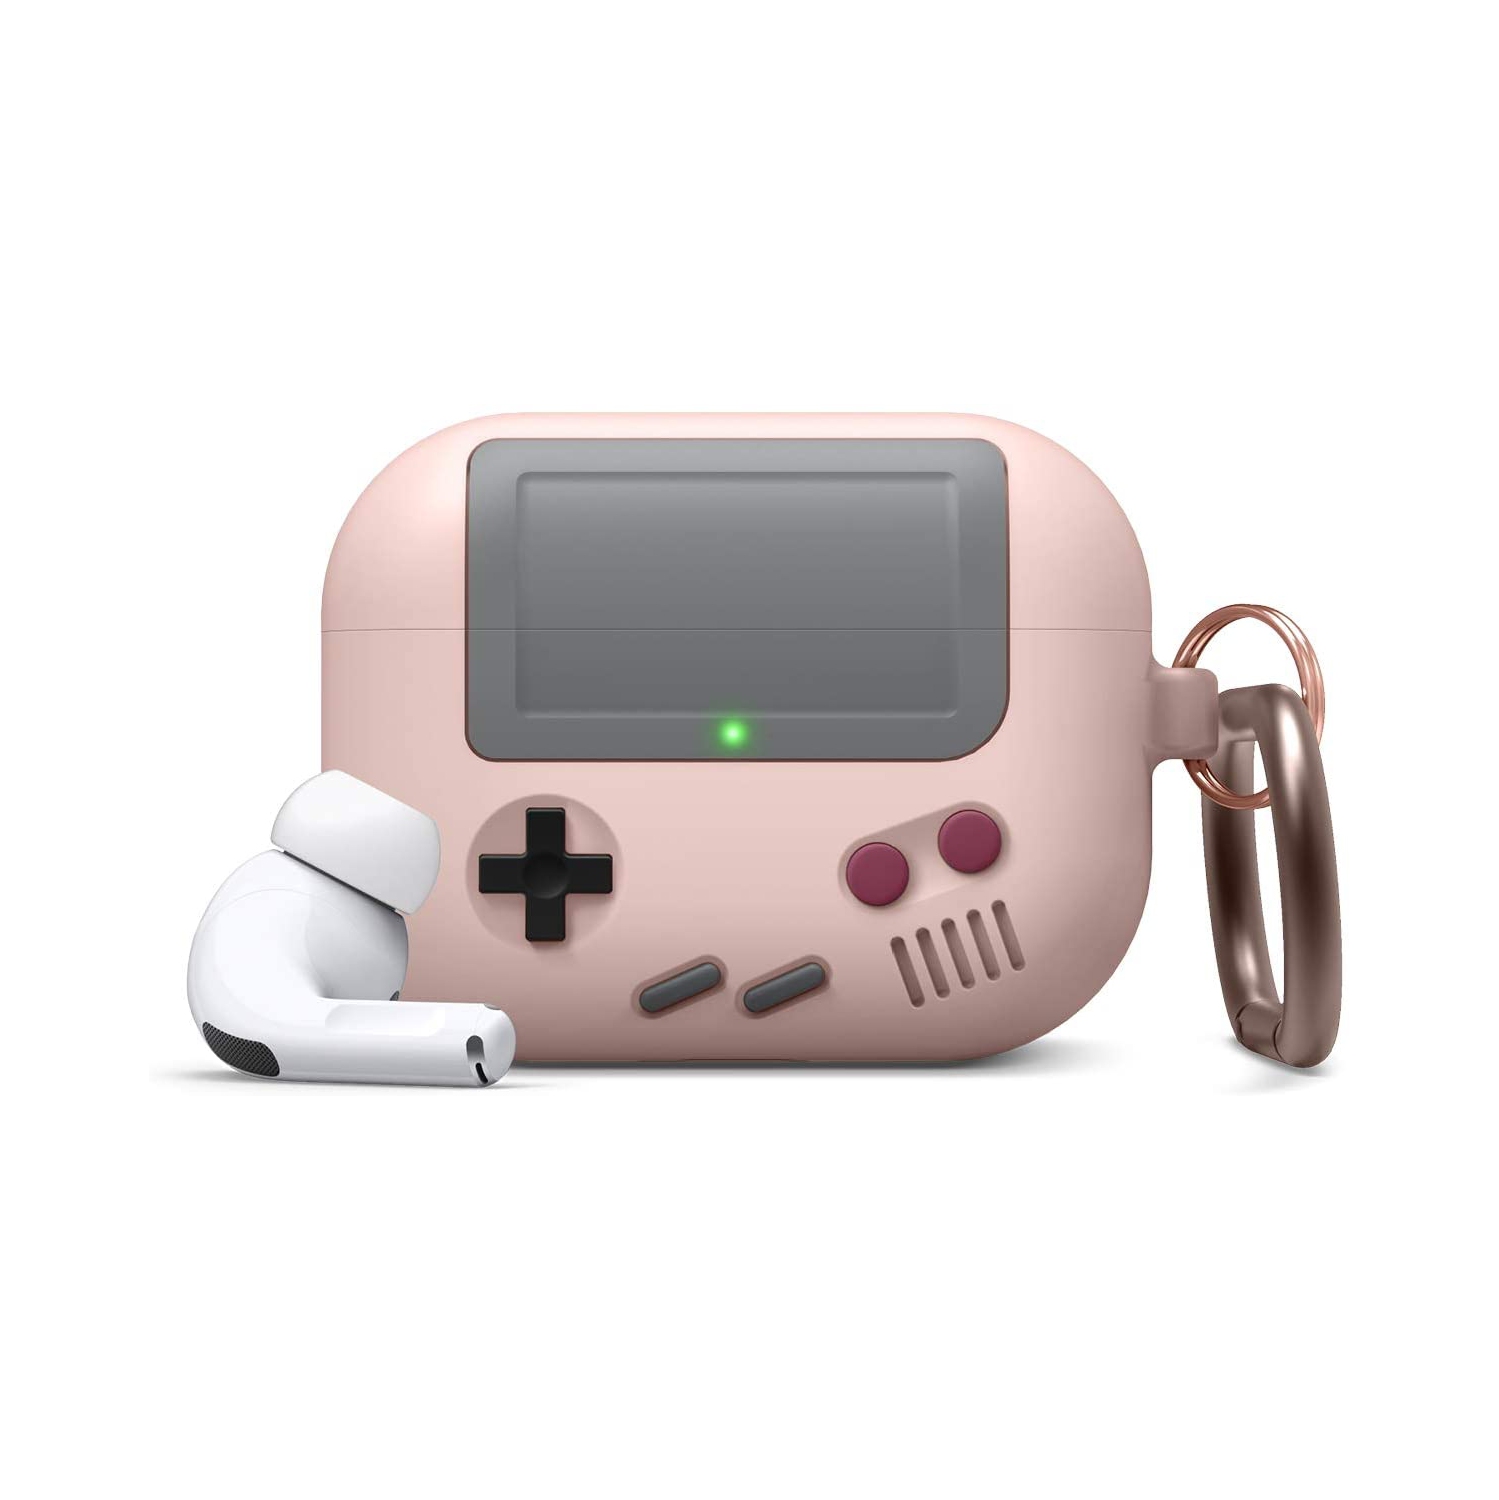 elago AW5 Compatible with Airpods Pro Case, Classic Handheld Game Console Design Protective Case with Keychain [US Patent Registered] [Sand Pink]